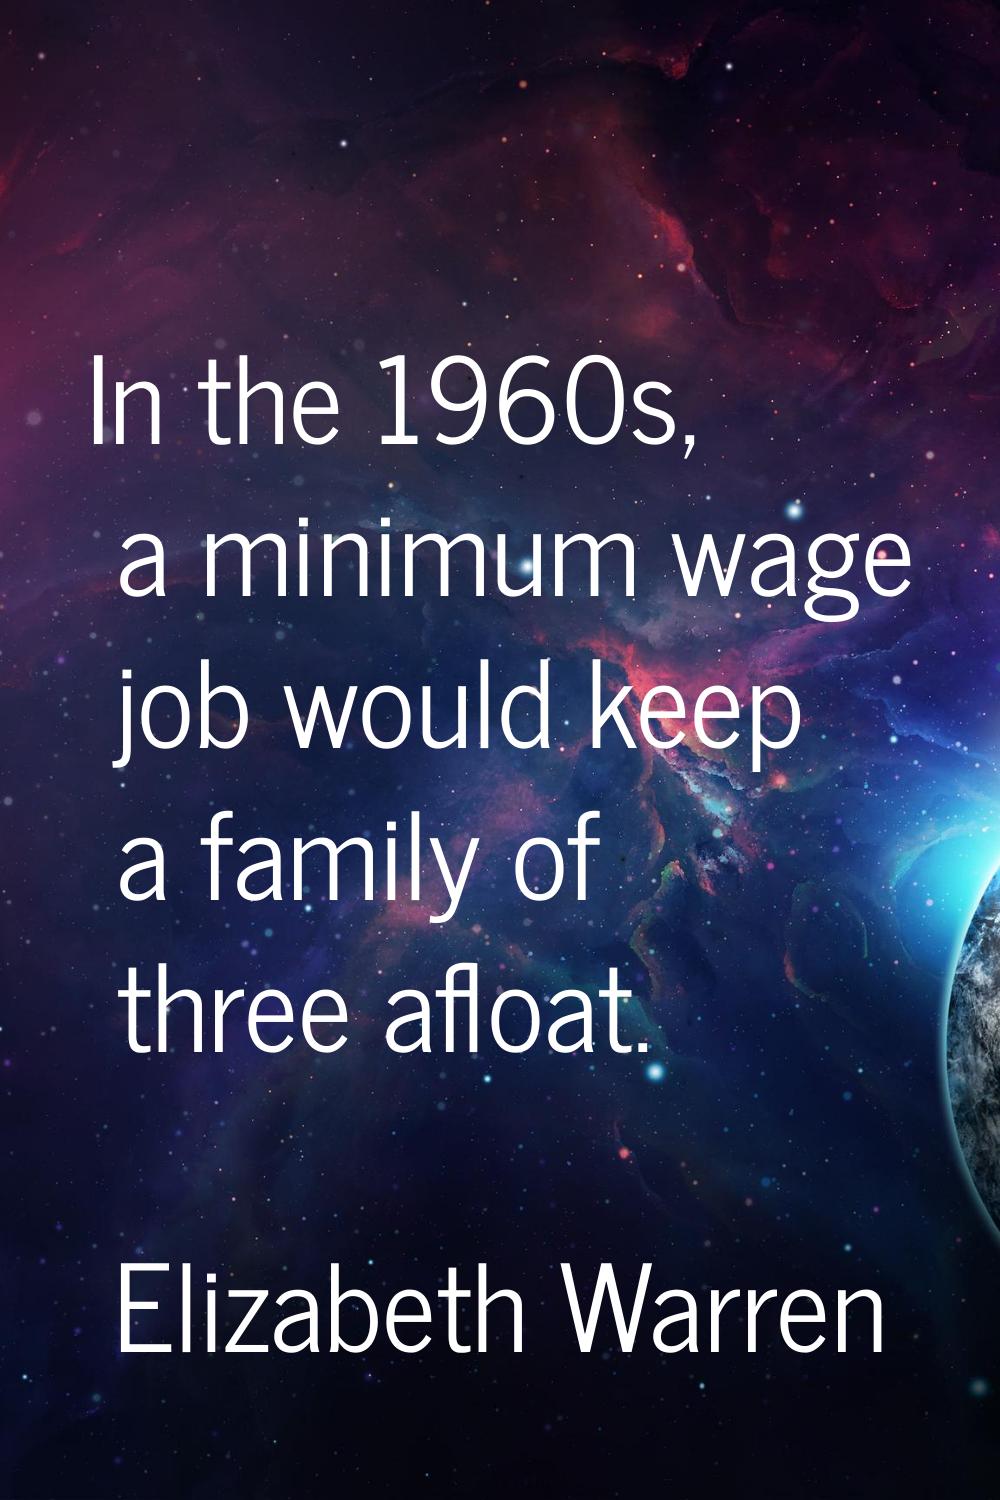 In the 1960s, a minimum wage job would keep a family of three afloat.